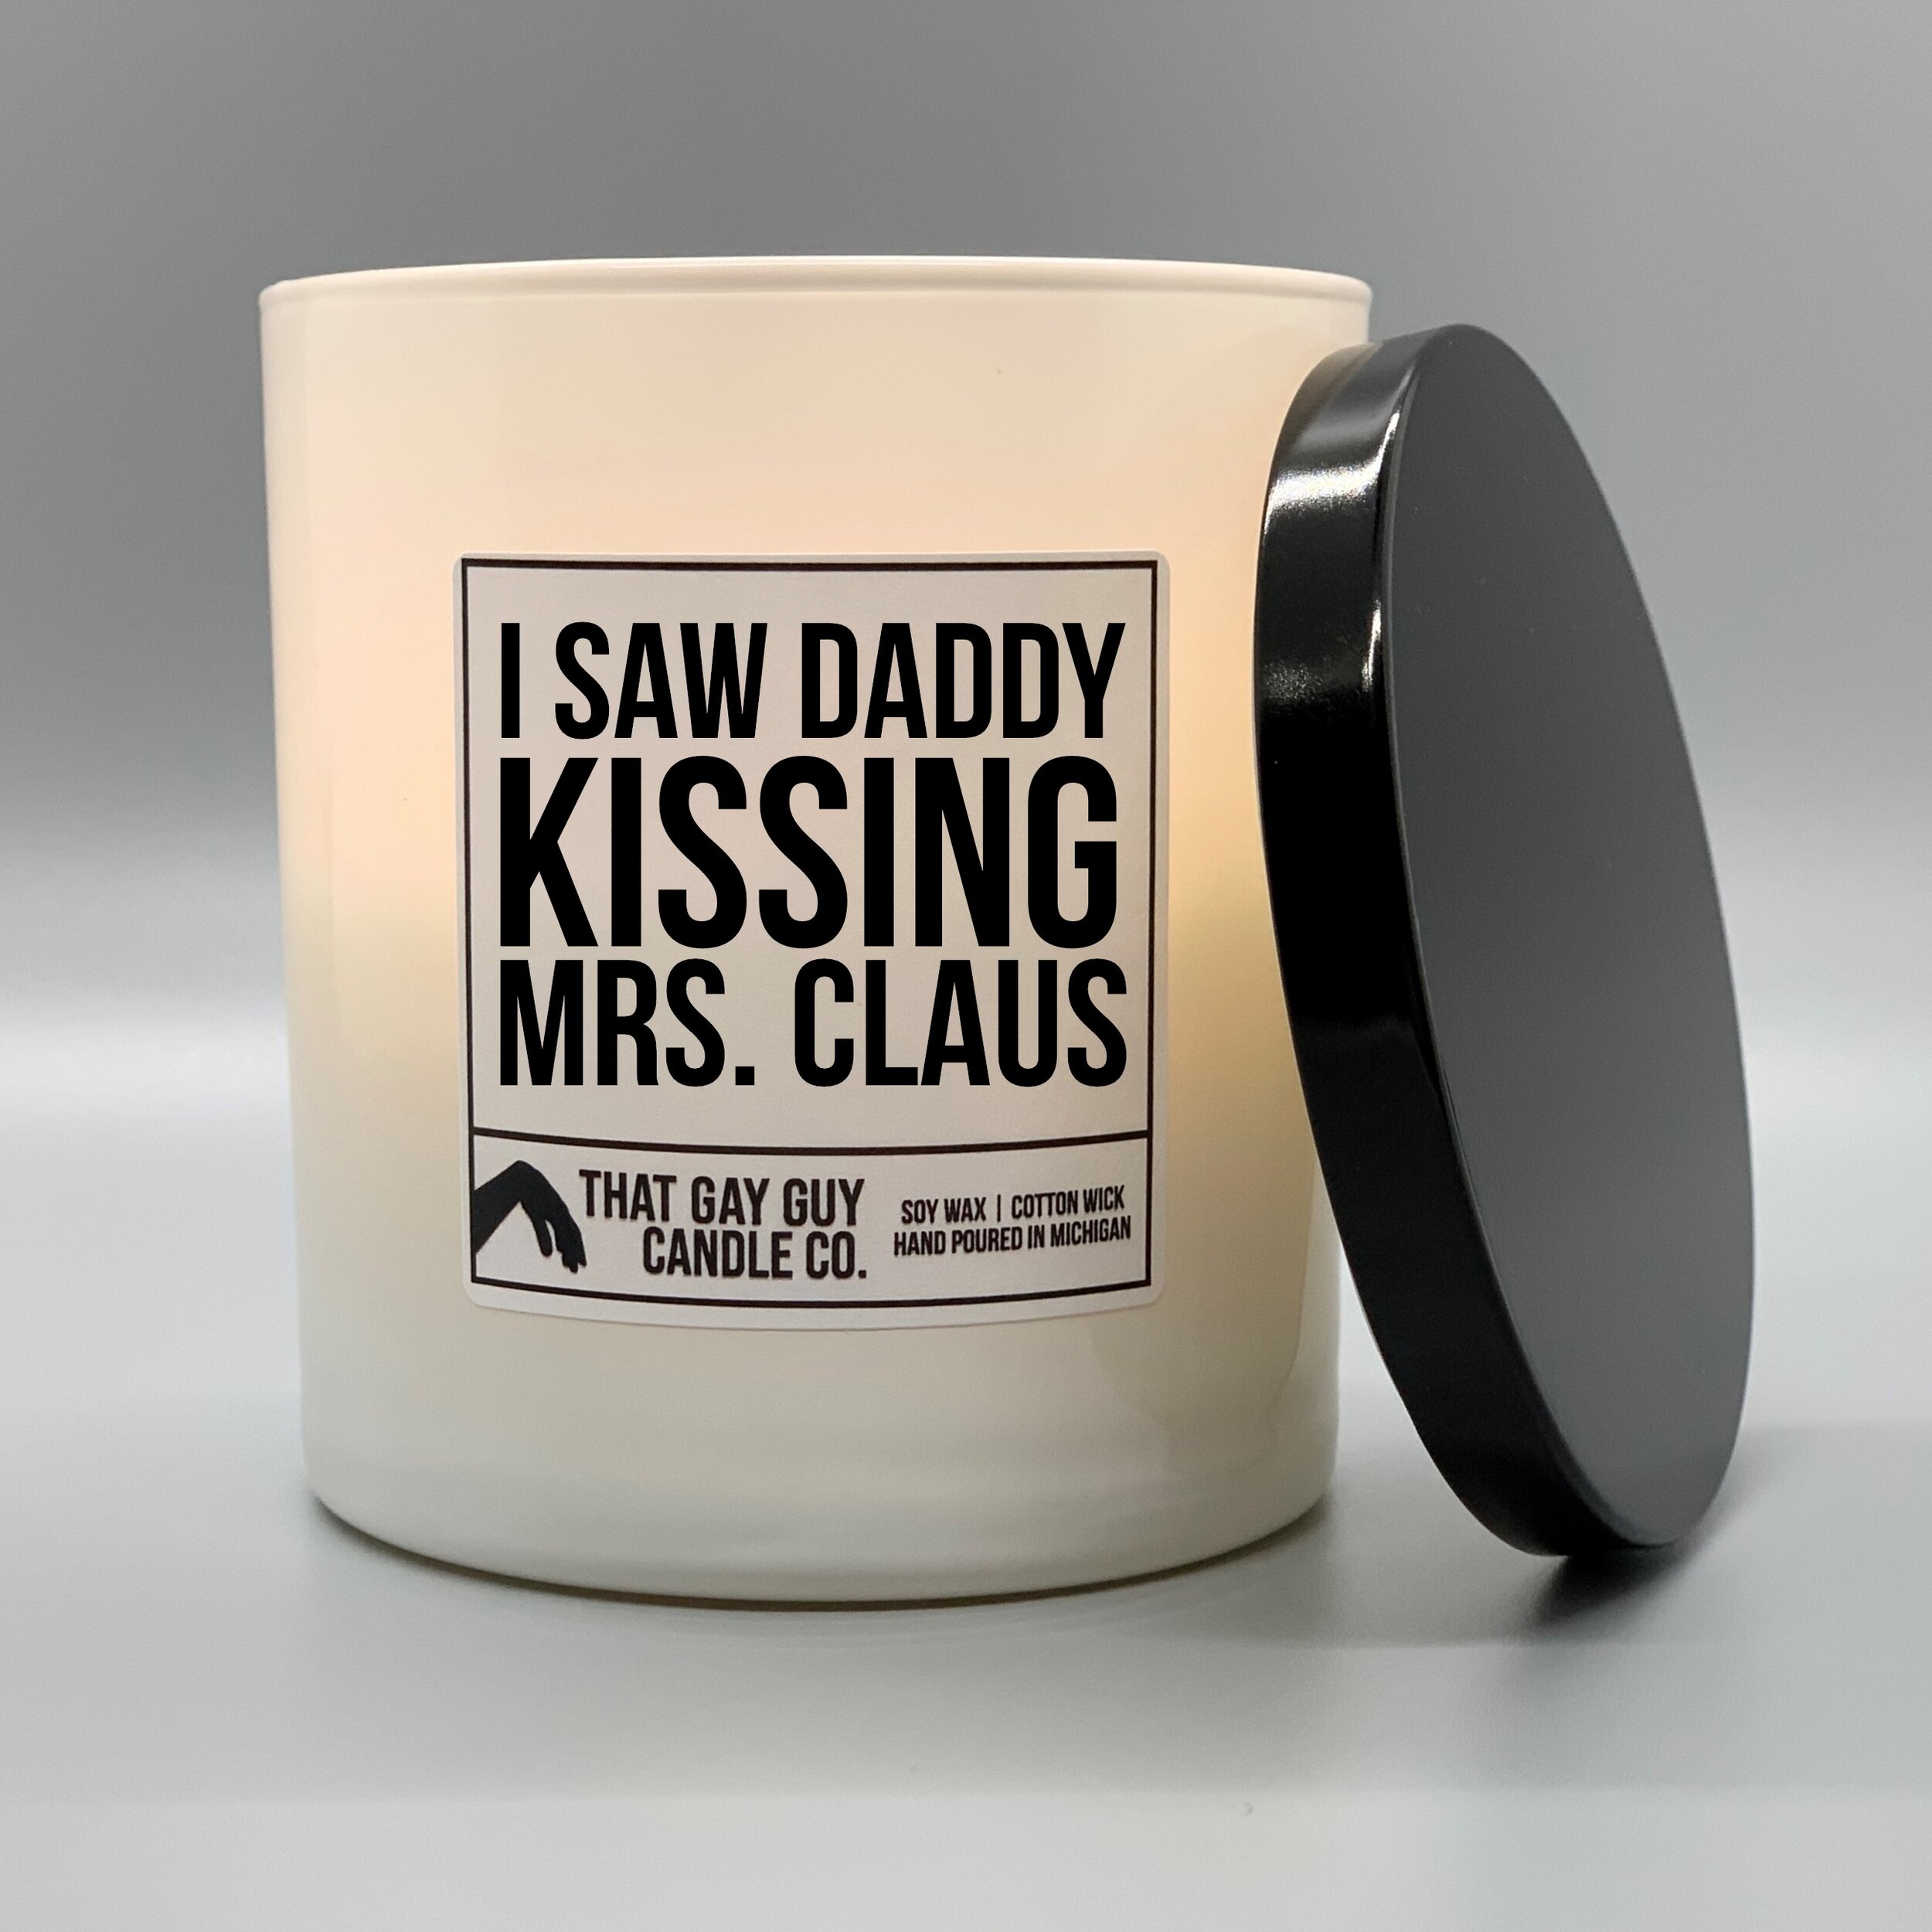 I SAW DADDY KISSING MRS CLAUS — That Gay Guy Candle Co.